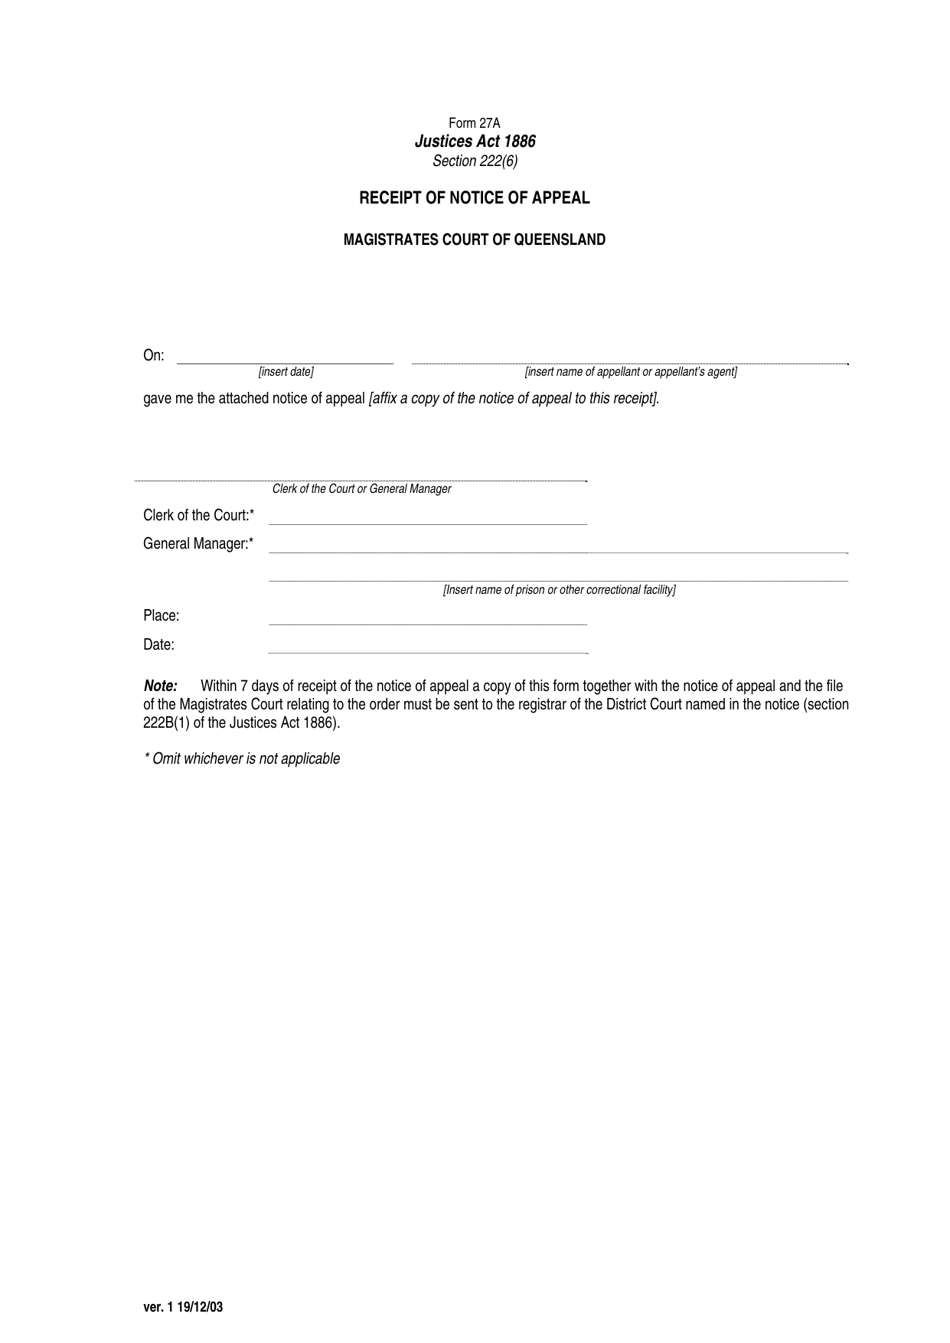 Form 27A Receipt of Notice of Appeal - Queensland, Australia, Page 1